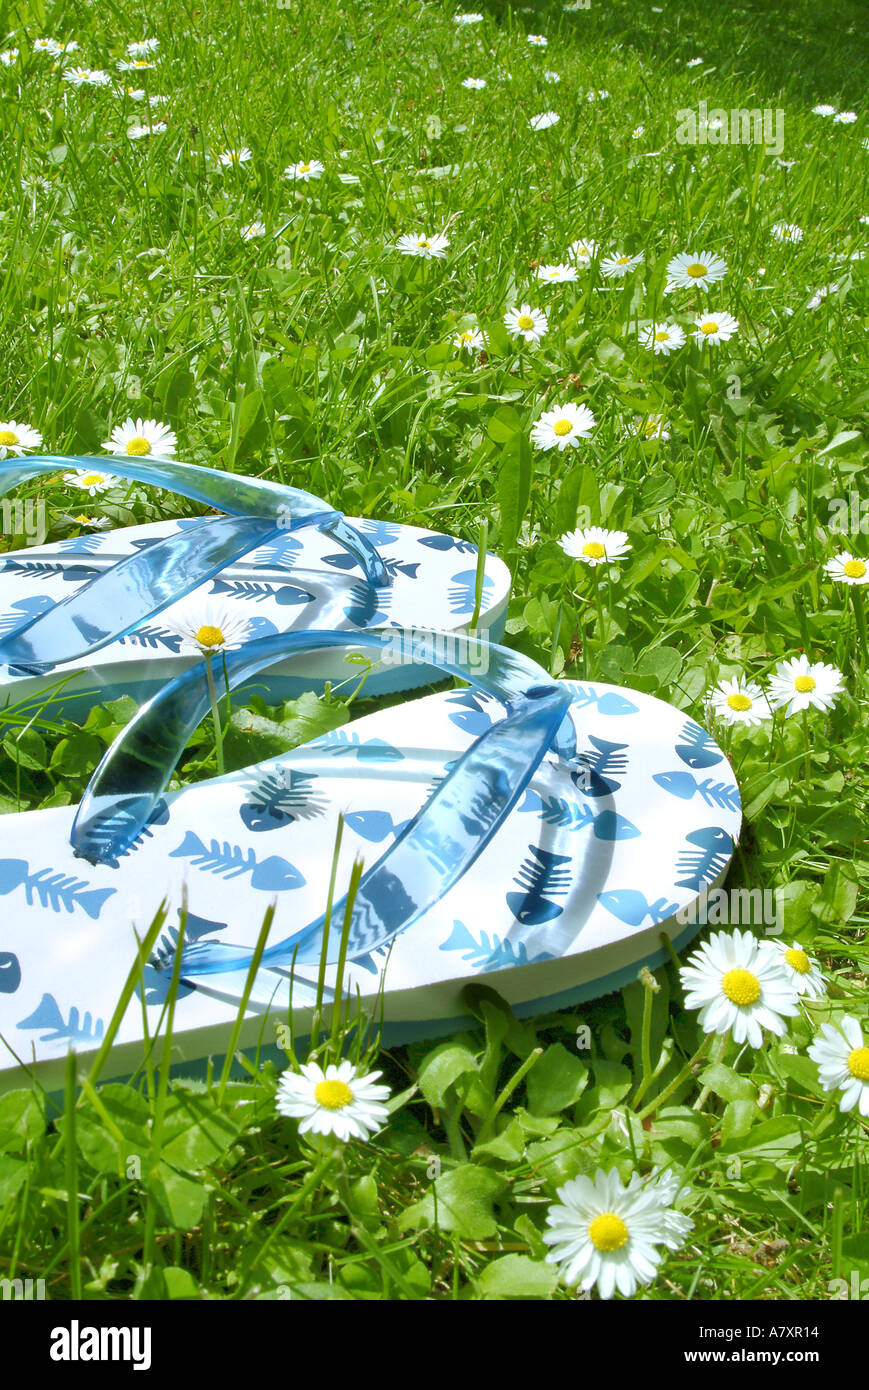 Flip Flops Shoes on a green lawn Stock Photo